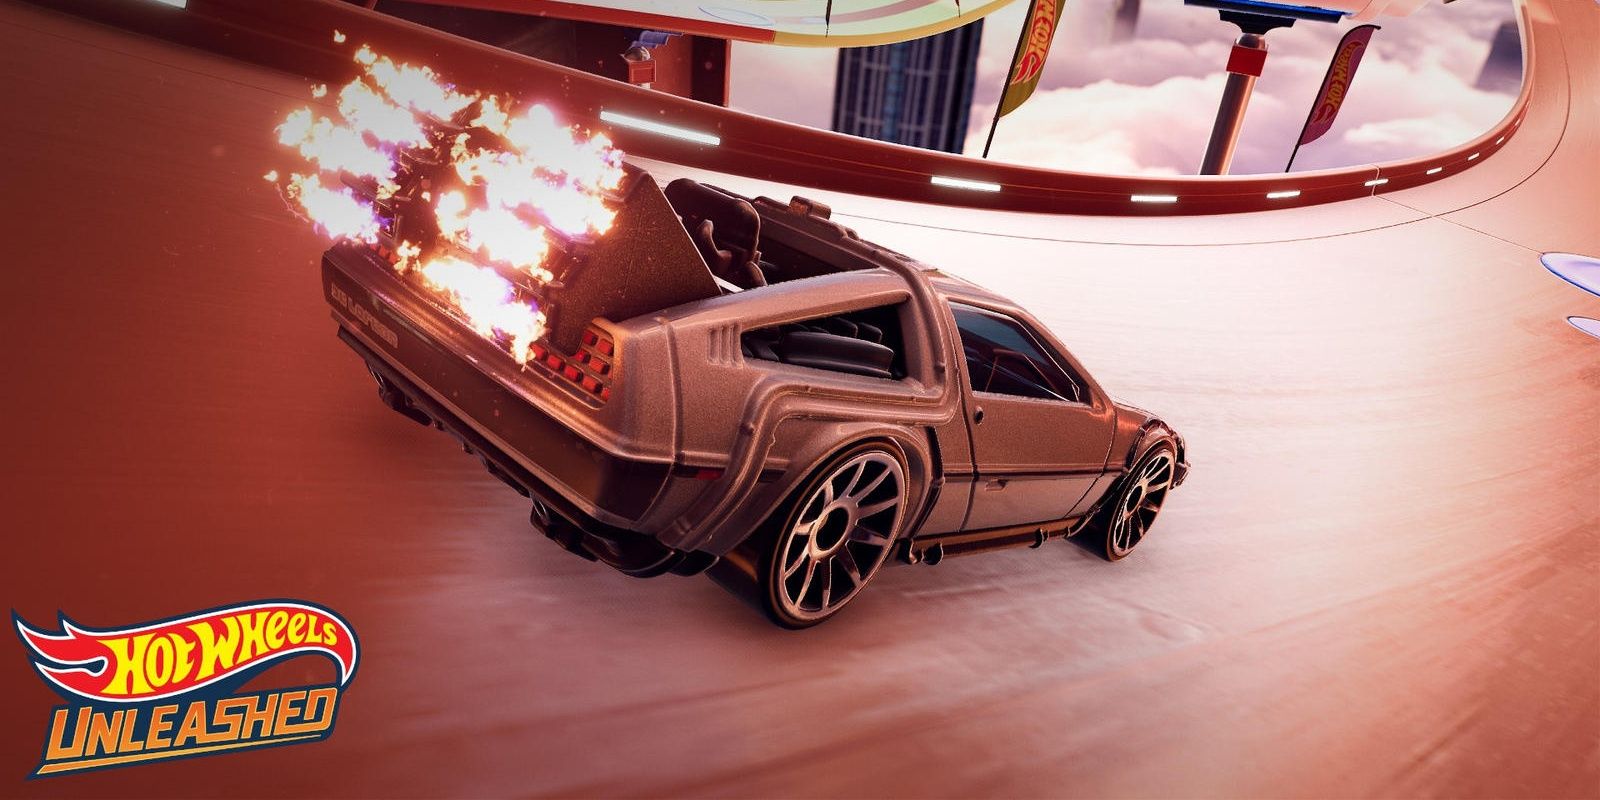 Back To The Future Time Machine in Hot Wheels Unleashed